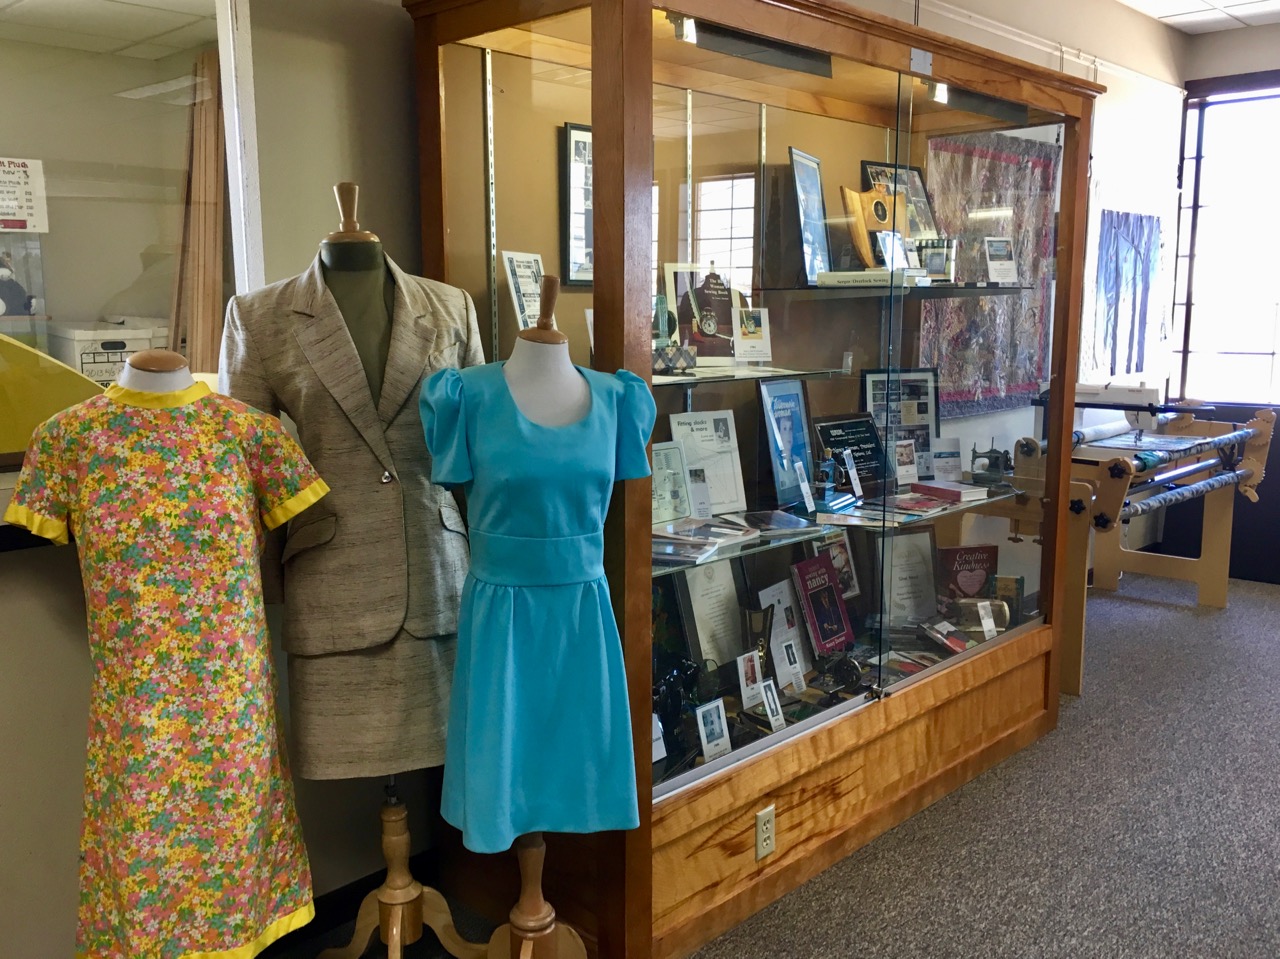 Celebrating Nancy Zieman Exhibit on display May 1 through September 30, 2019 in the Gallery of the Winneconne, WI Municipal Center